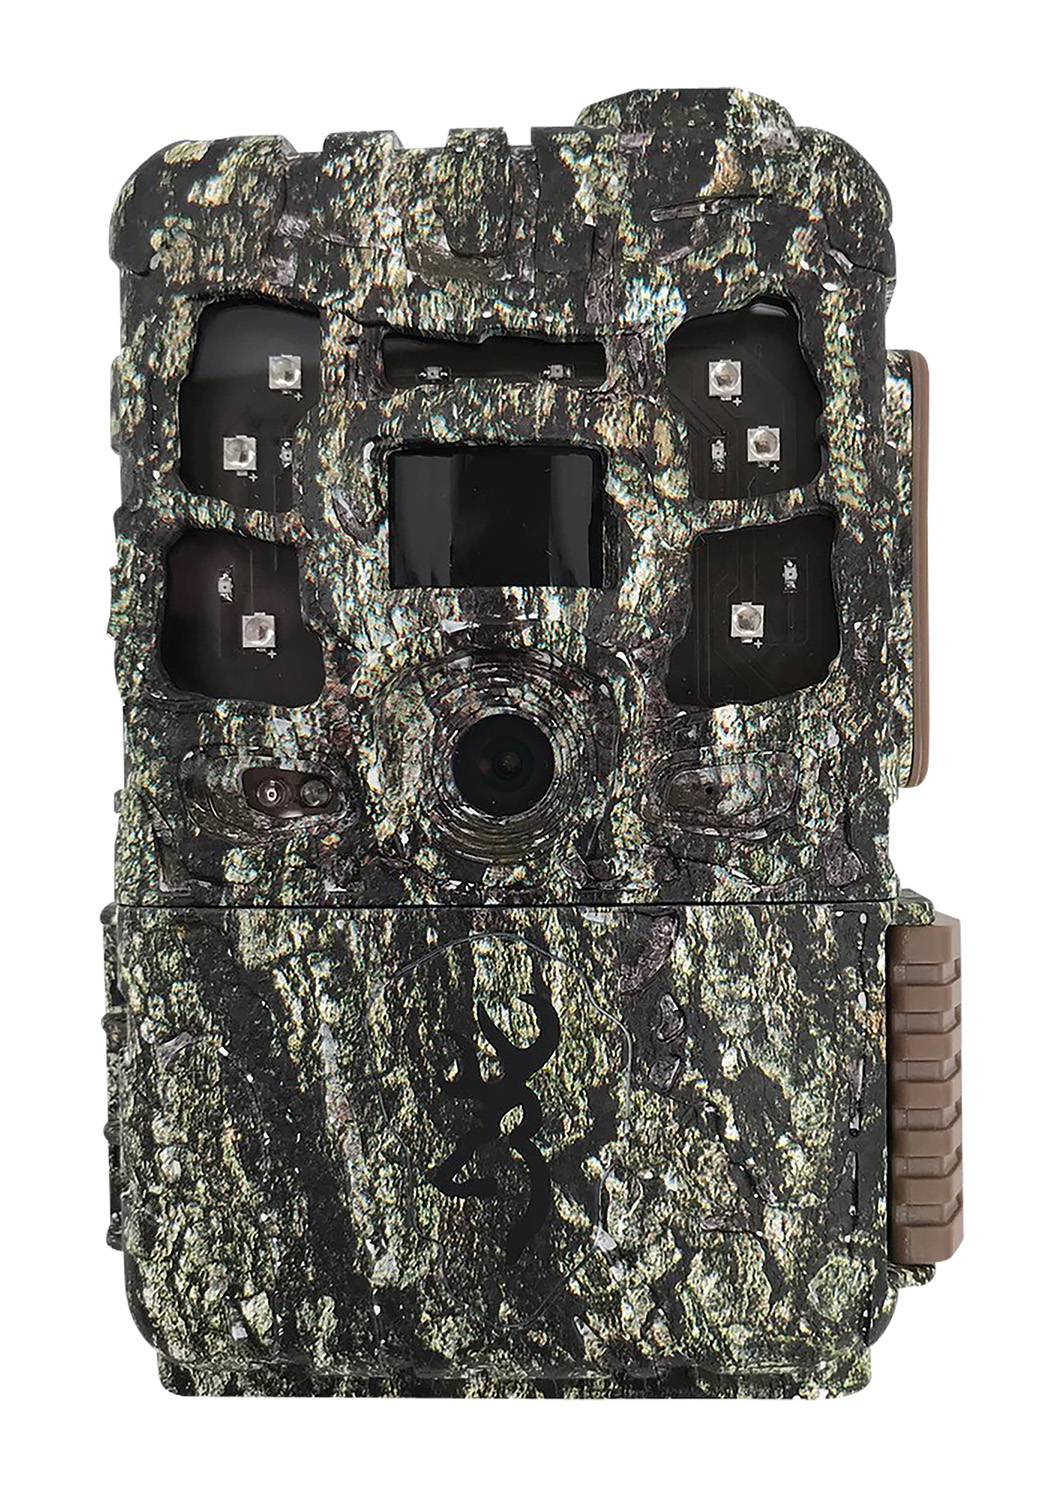 Browning Trail Cameras PSM Defender Pro Scout Max Camo 20MP Resolution, SDXC Card Slot/Up to 512GB Memory, Features .25